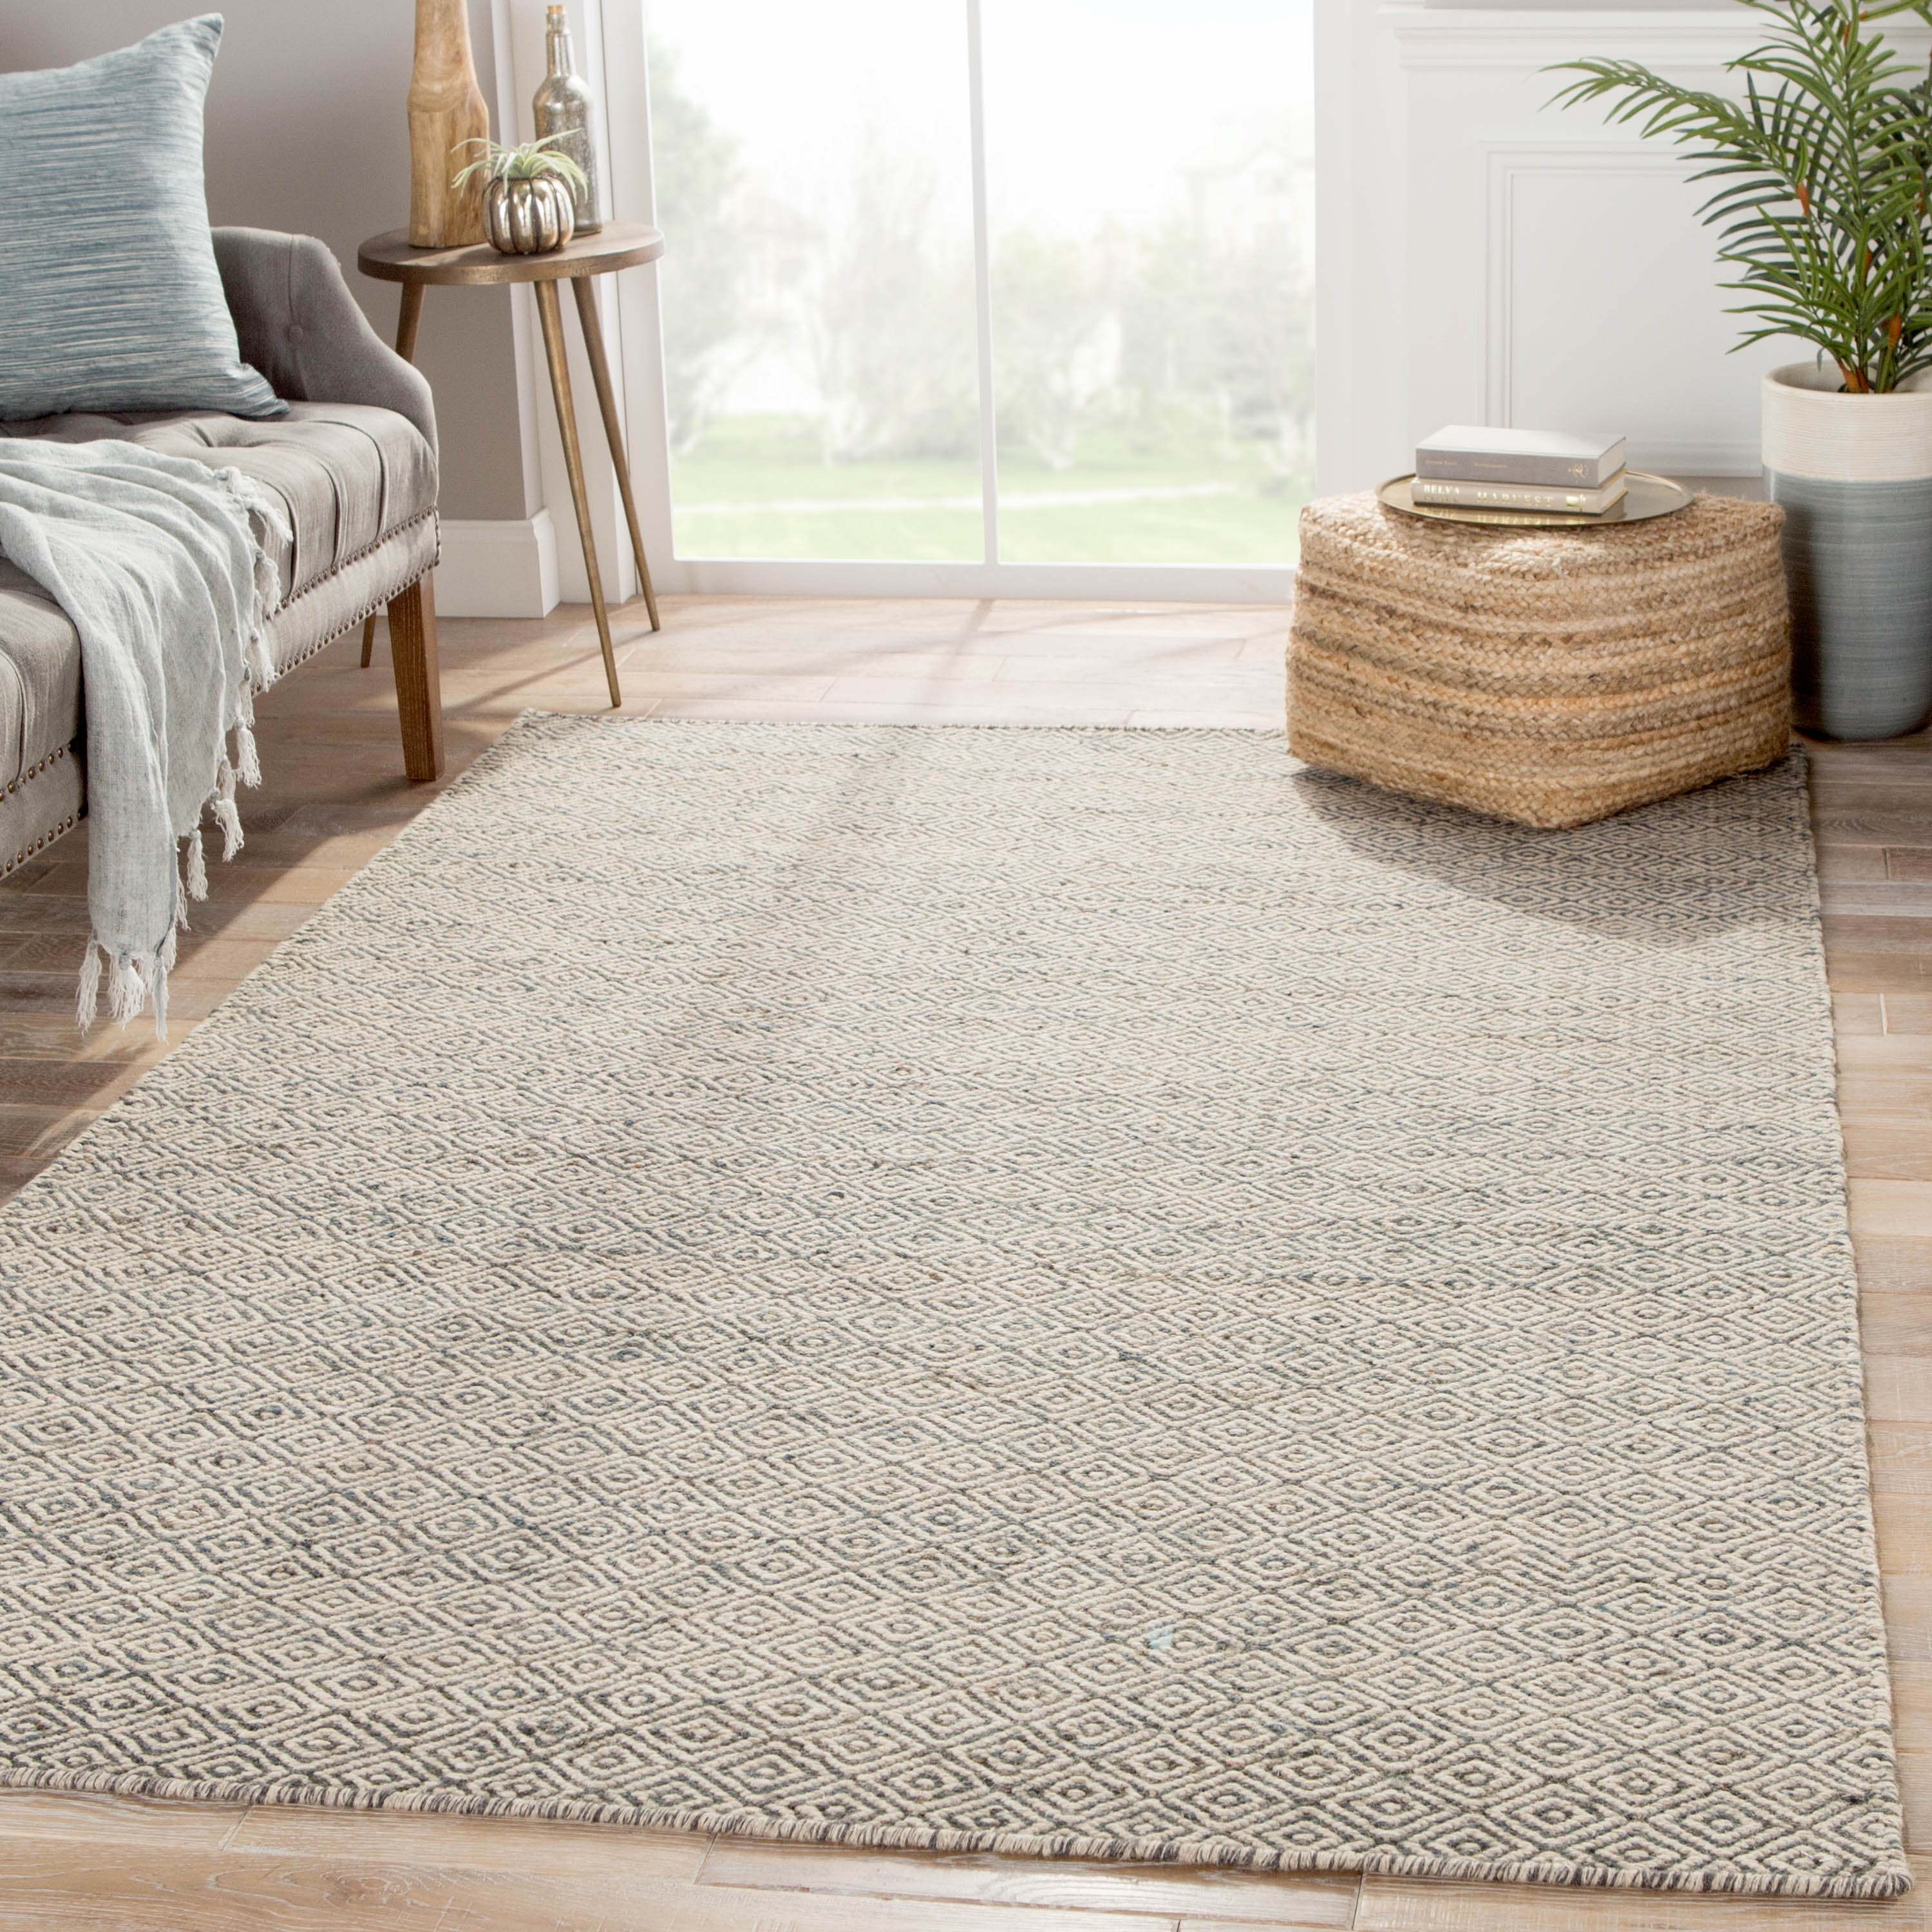 Wales Natural Geometric Gray/ White Area Rug (8' X 10') - Image 4